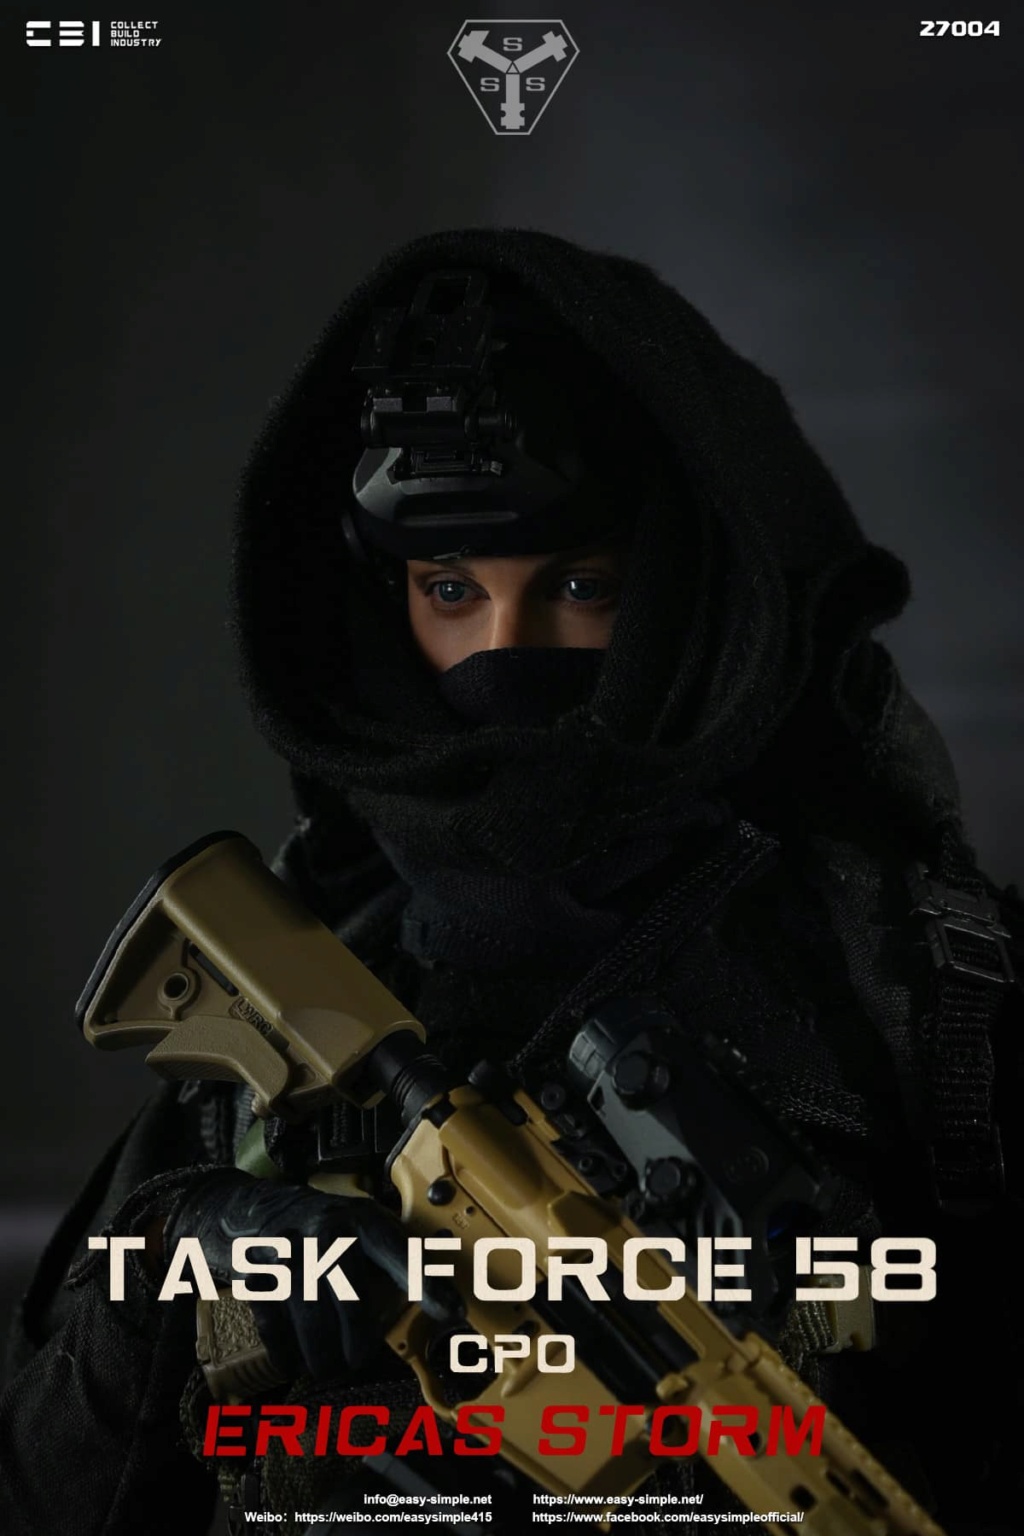 easy - NEW PRODUCT: CBI & Easy&Simple: 27004 1/6 ERICA STORM - TASK FORCE 58 CPO action figure 18294